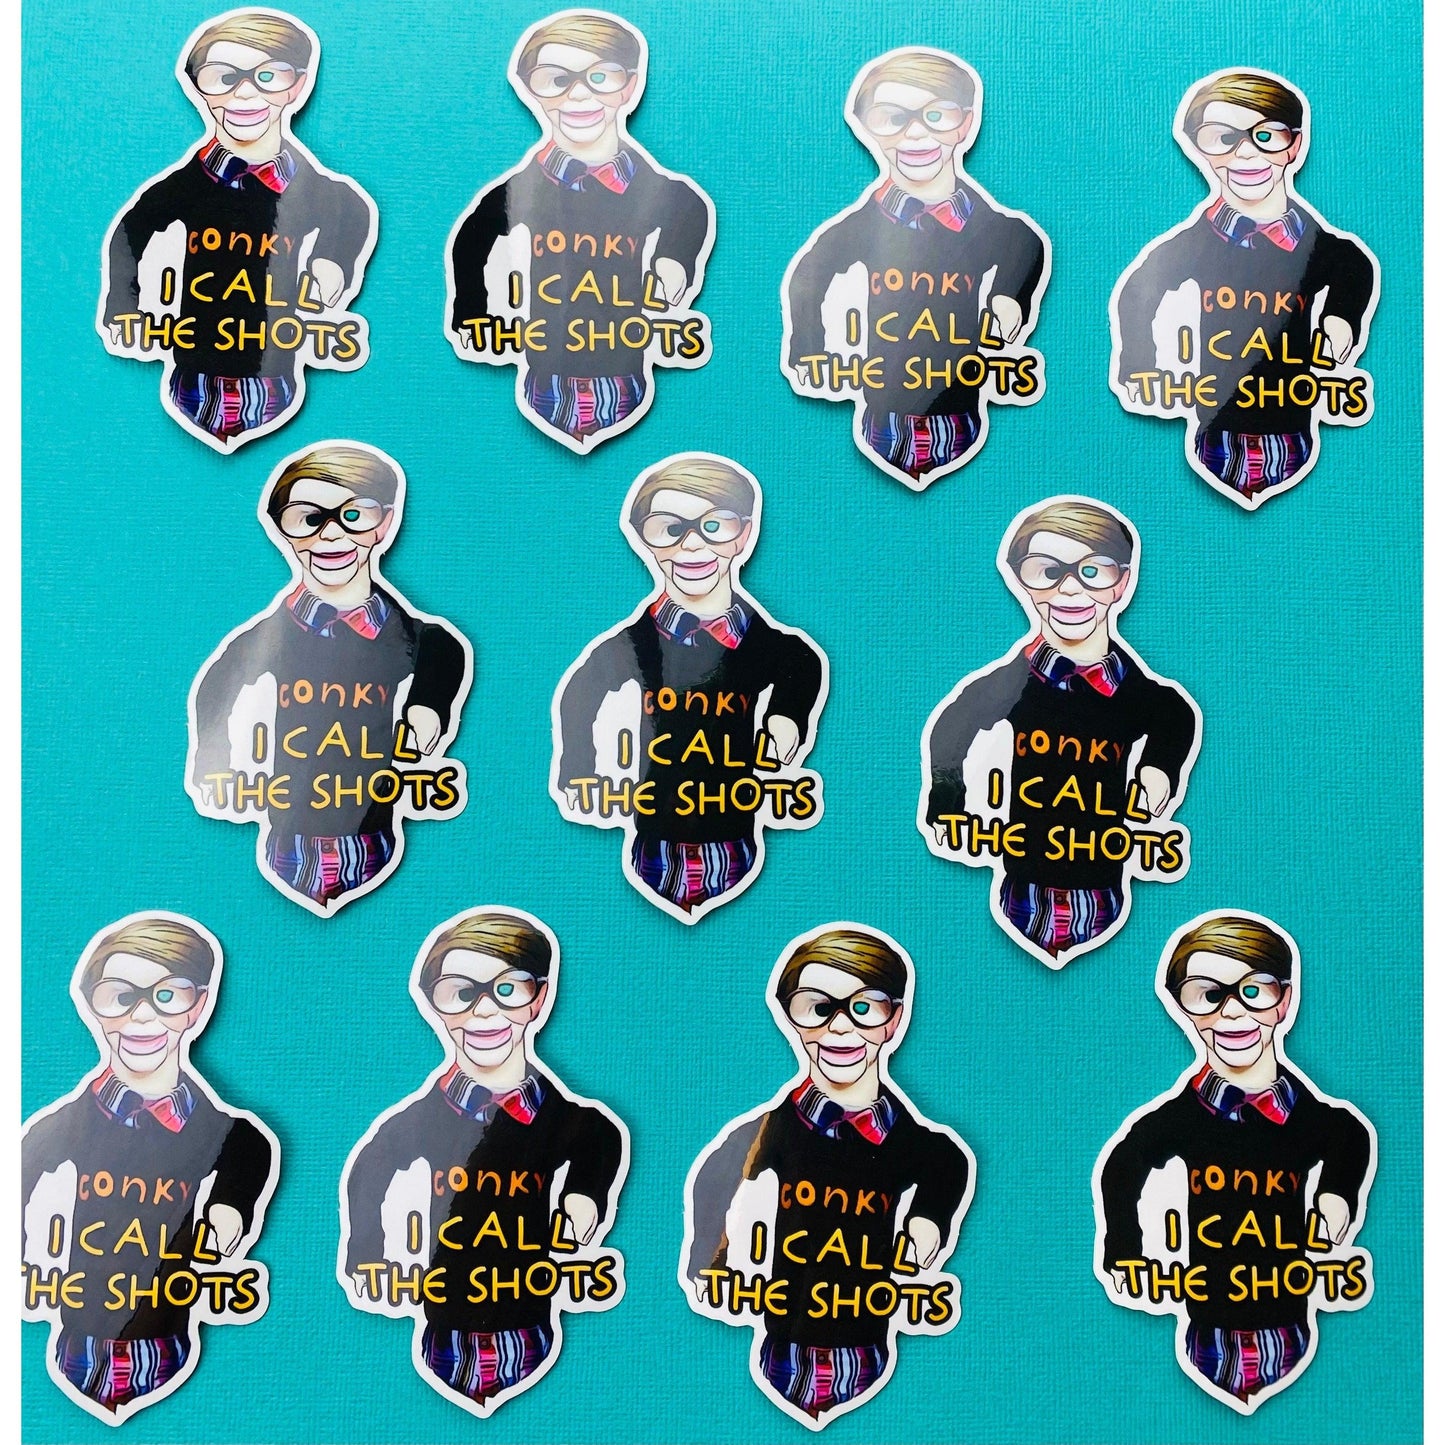 Trailer Park Boys Conky Sticker | Officially Licensed Trailer Park Boys Sticker | Conky Sticker Trailer Park Boys Merch | Stickers for Men - Ottos Grotto :: Stickers For Your Stuff